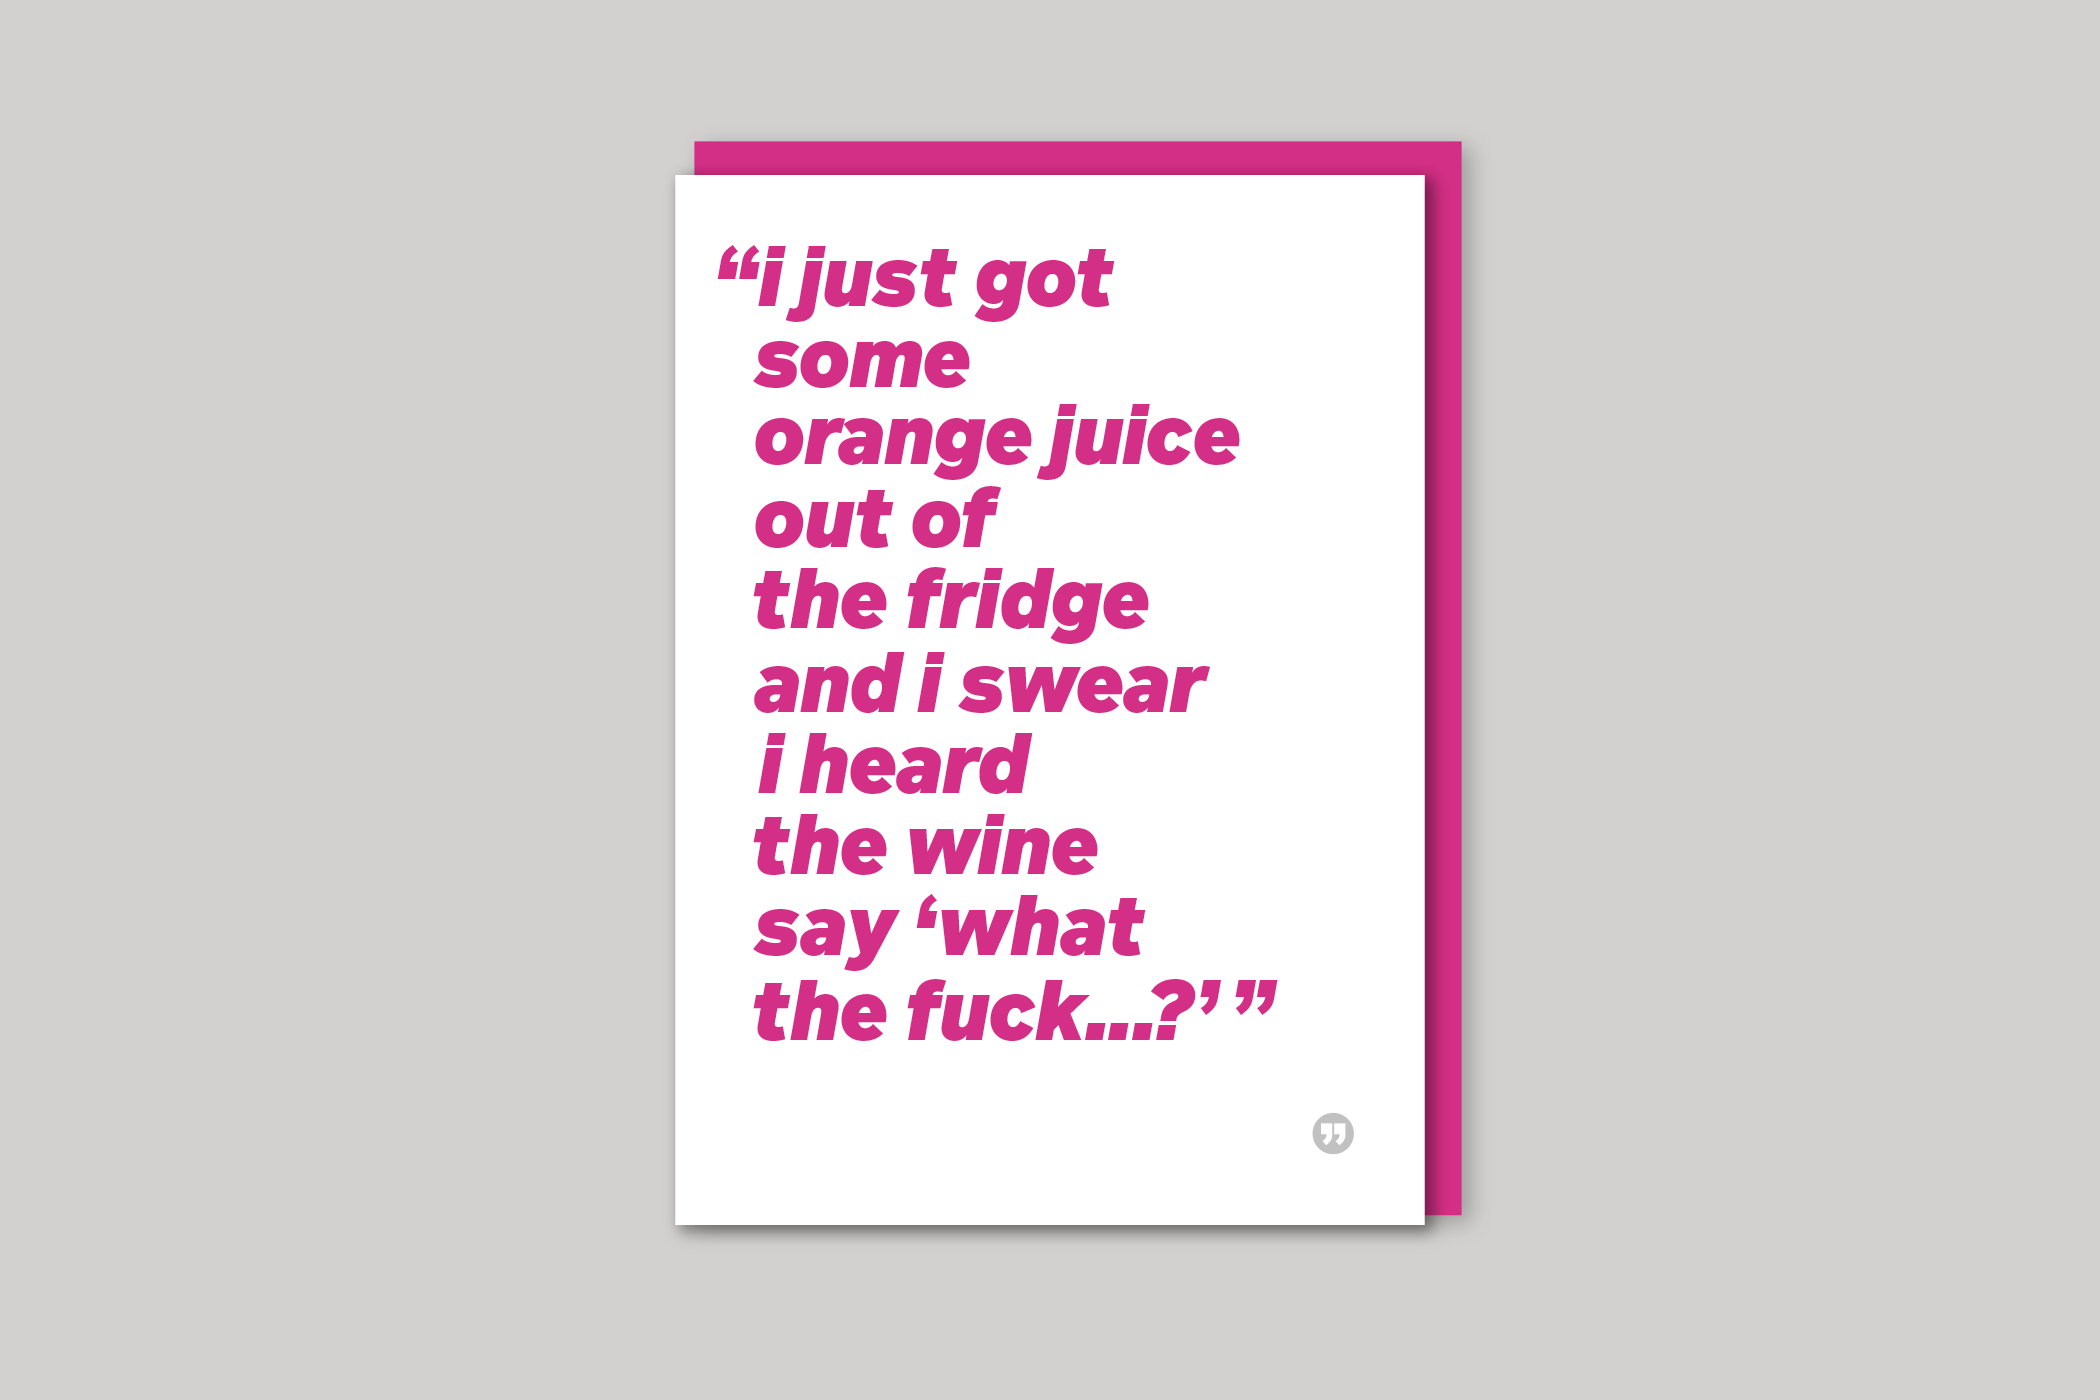 Orange Juice funny quotation from Quotecards range of cards by Icon, back page.